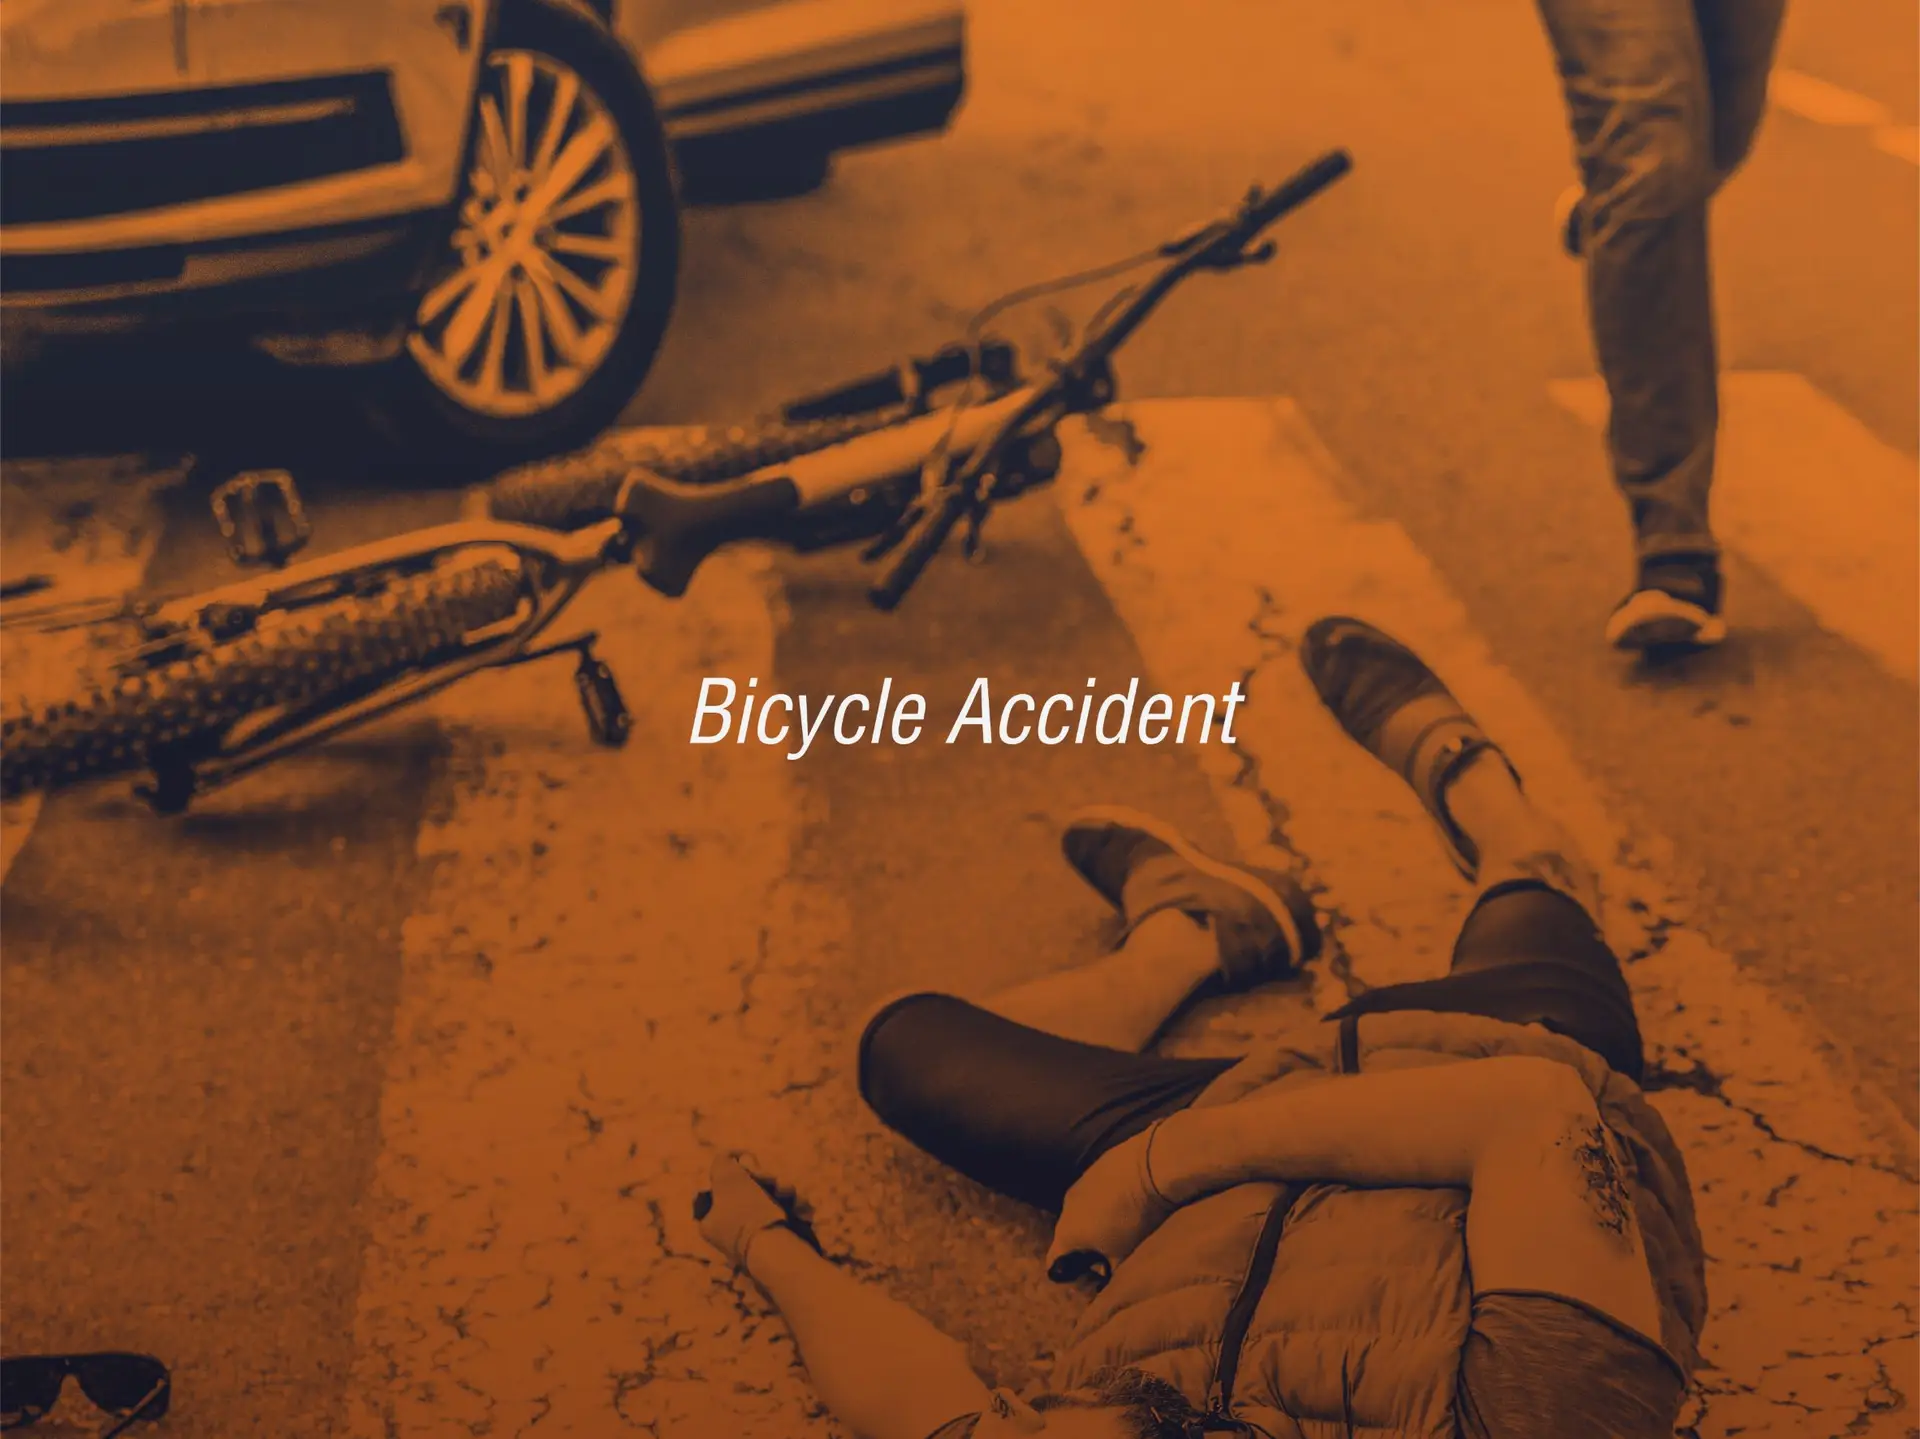 Newport Beach bicycle accident lawyer